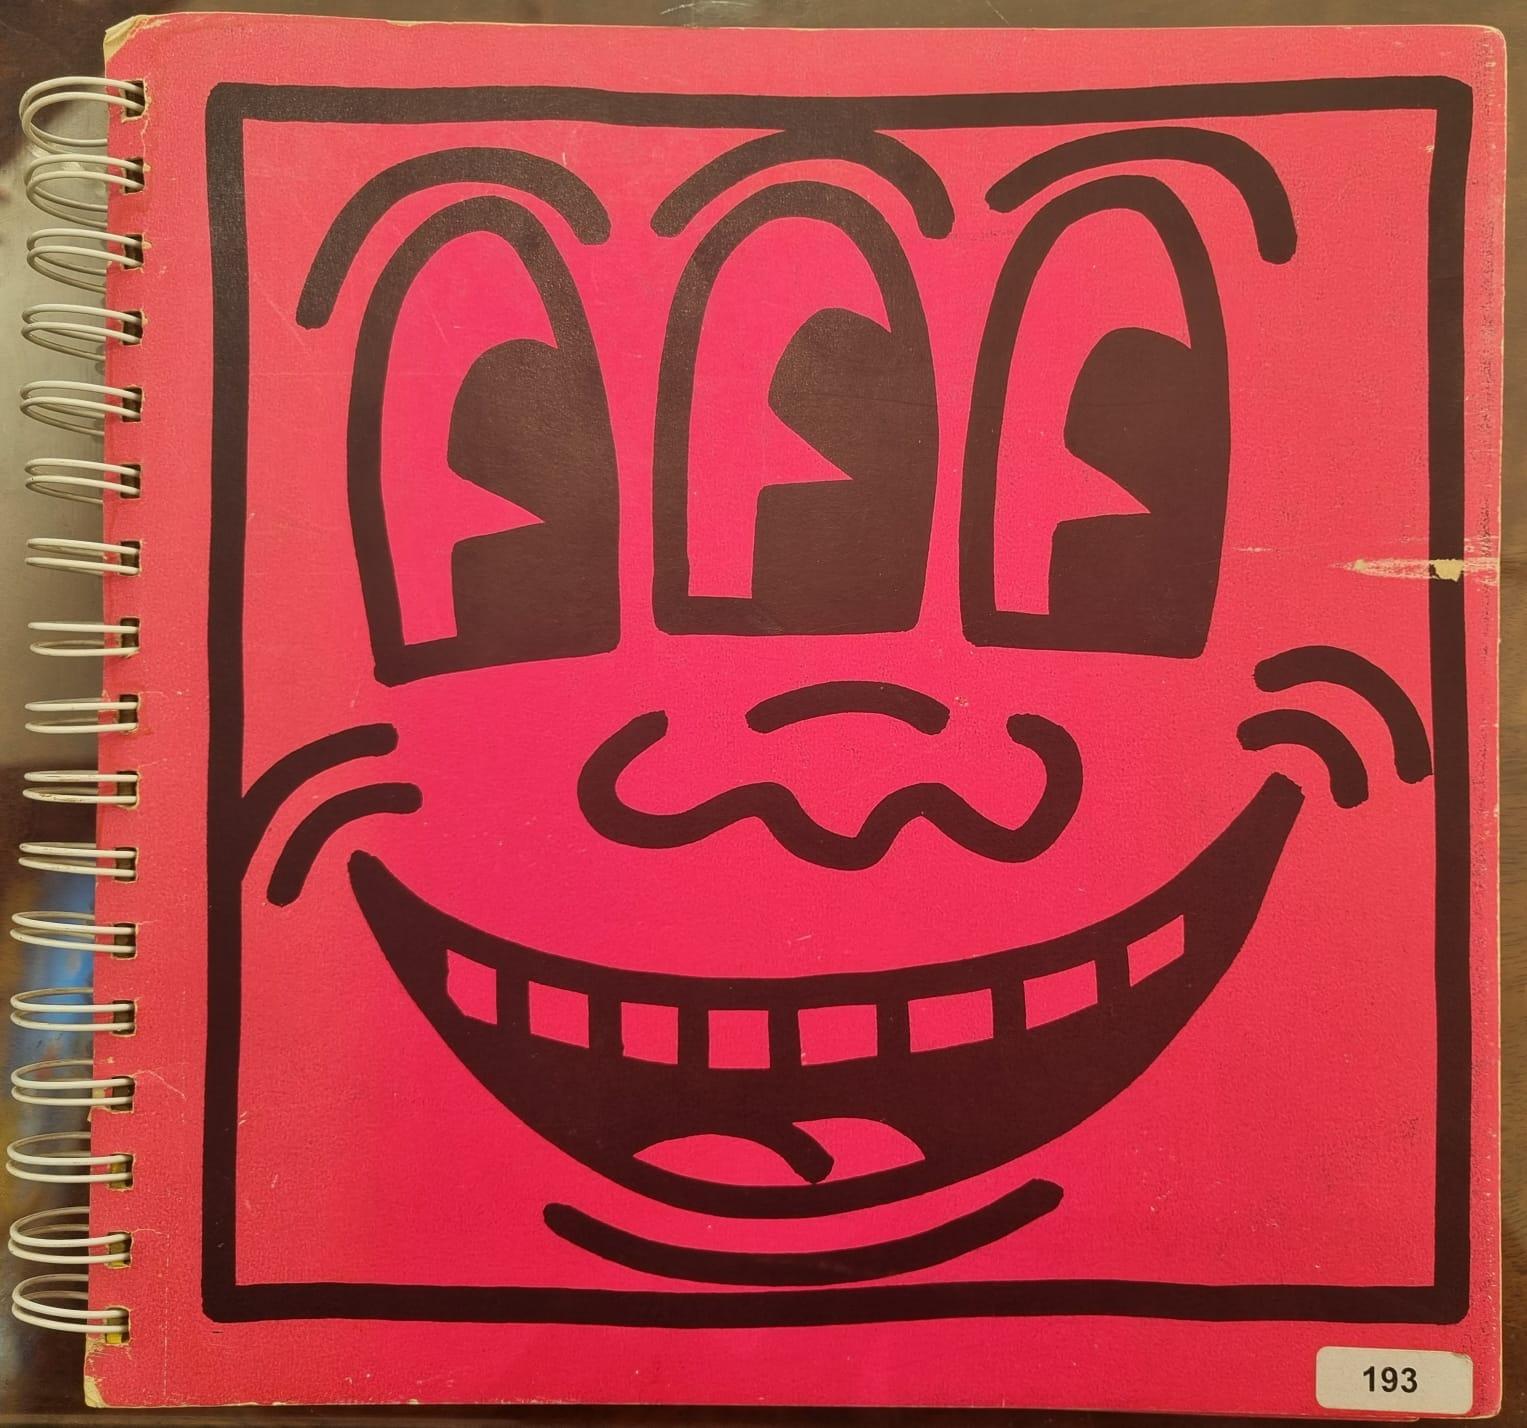 Signed artist catalog with a drawing - Pop Art Mixed Media Art by Keith Haring